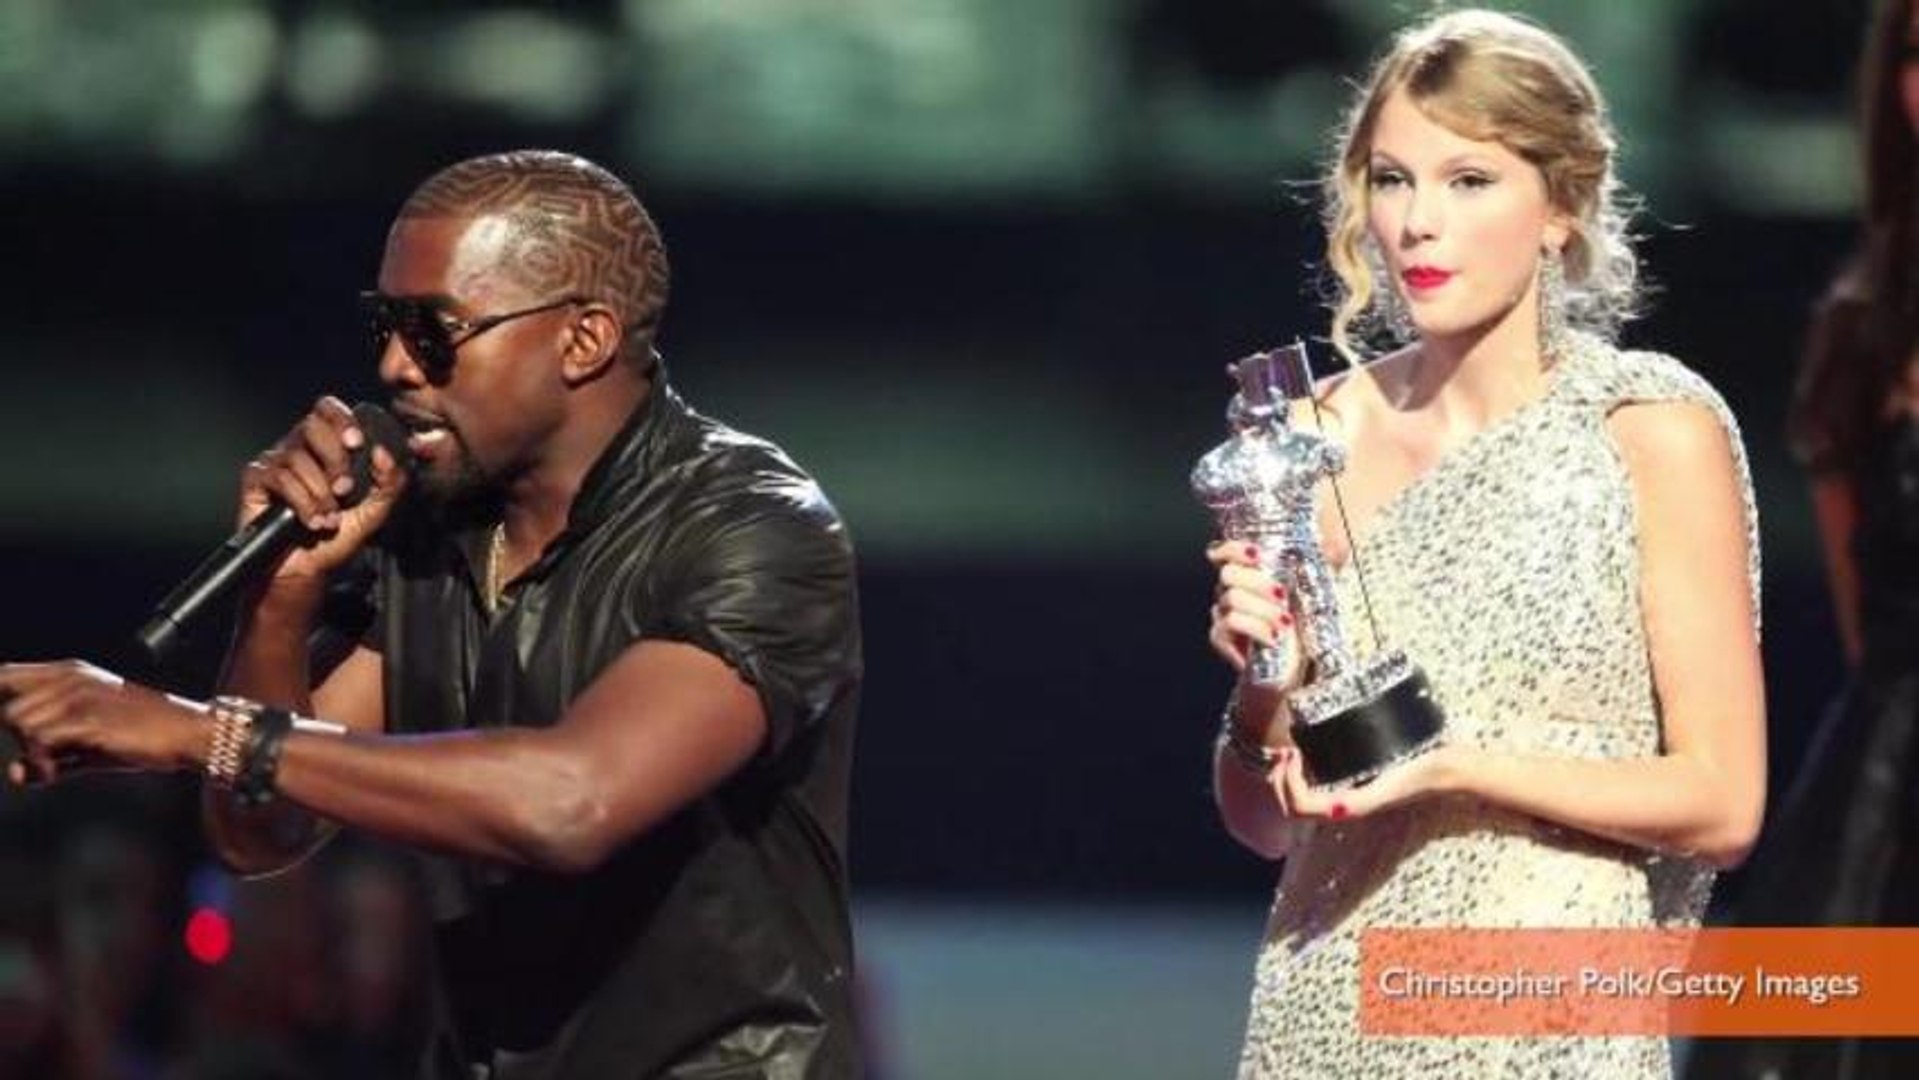 Taylor Swift Jokes About Kanye West VMA Incident in Note to Ed Sheeran